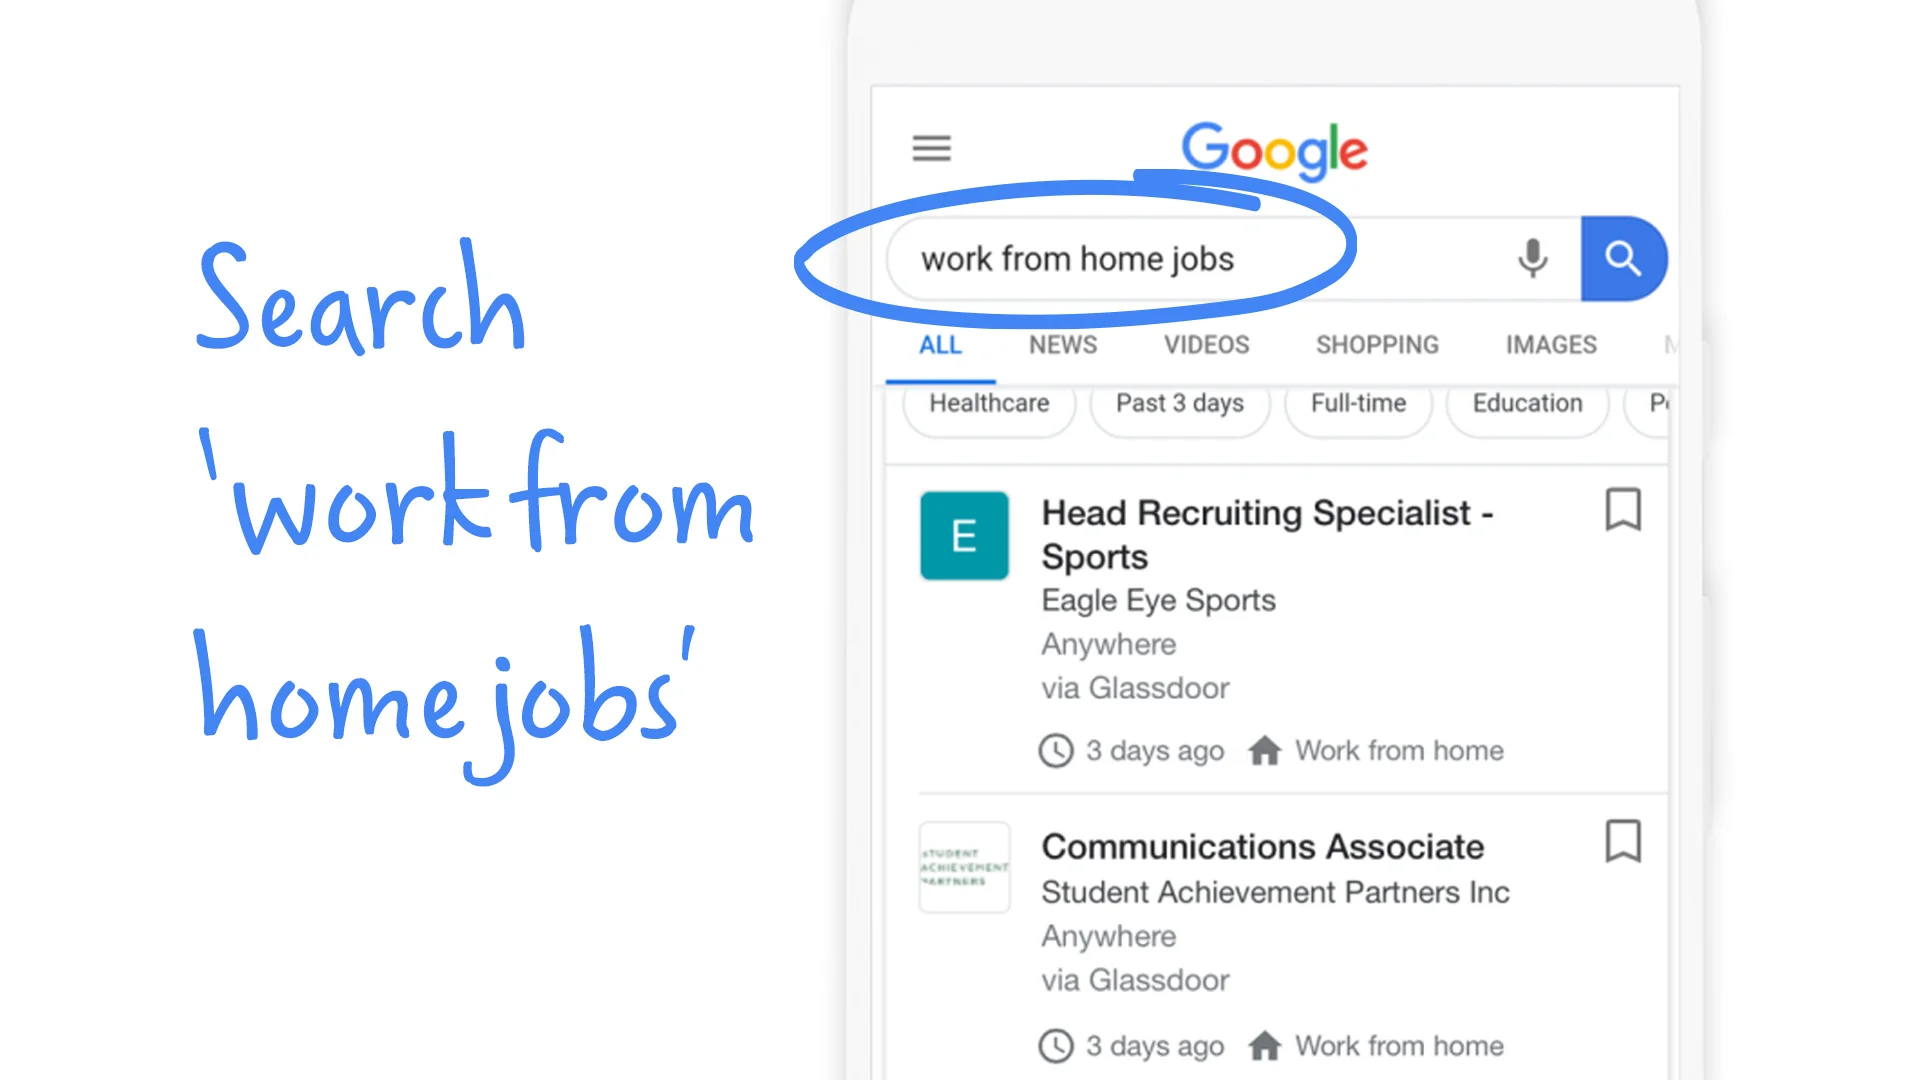 Find remote job opportunities via Google Search